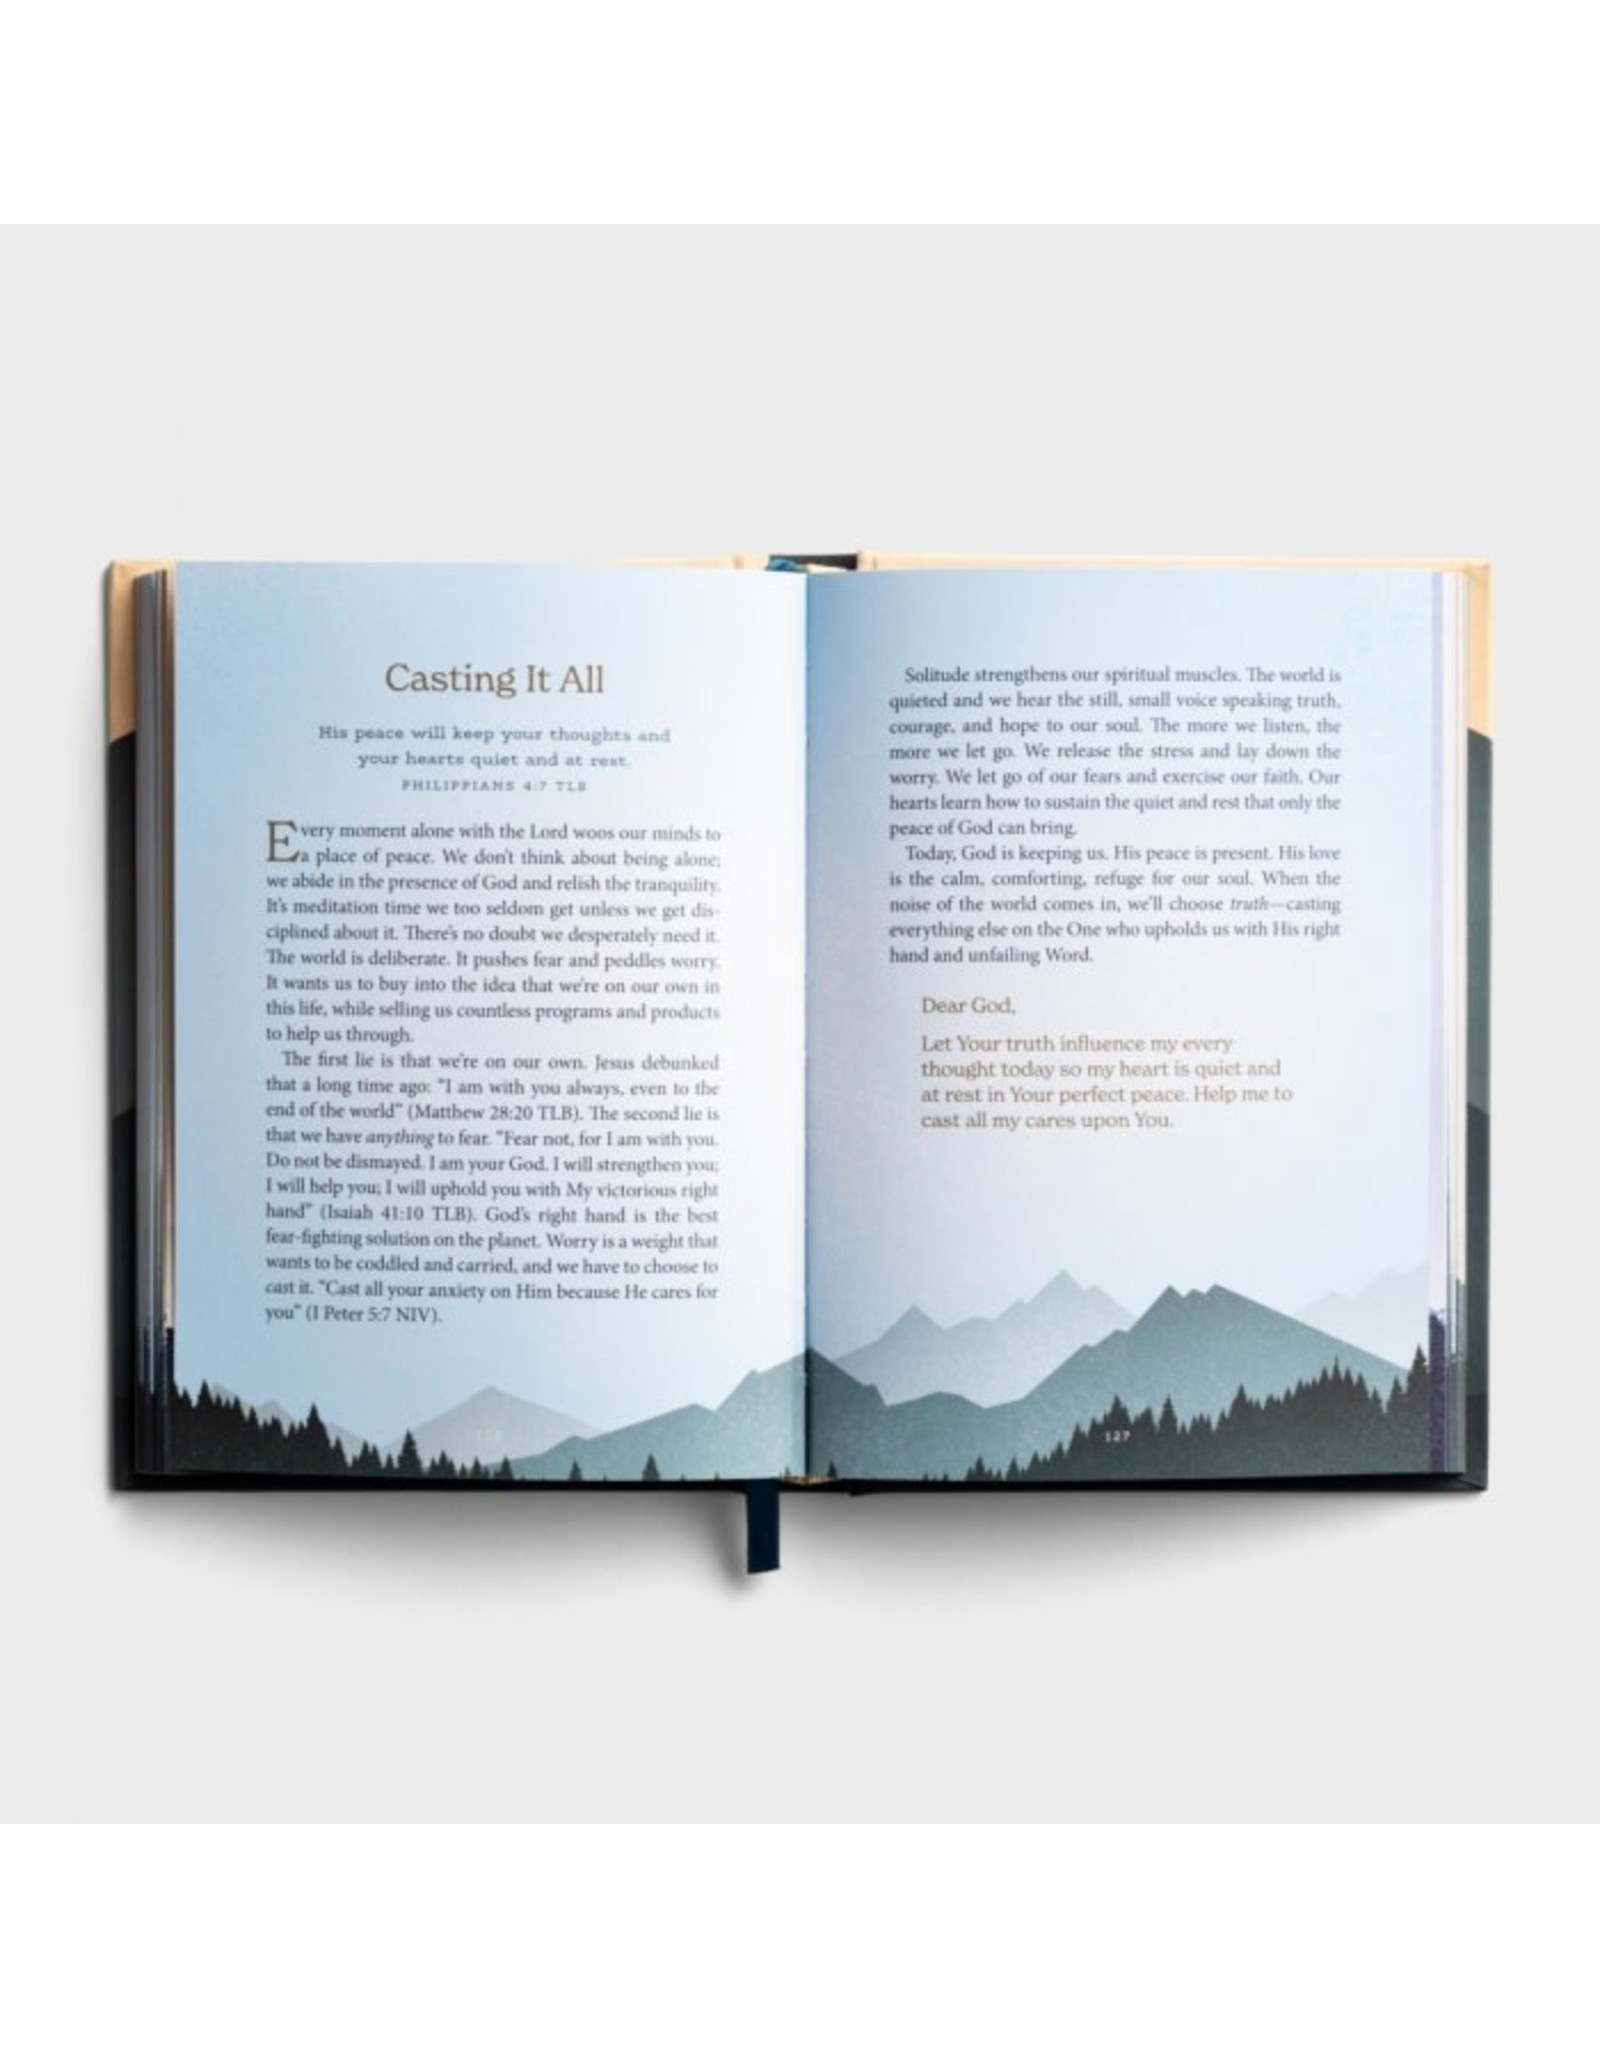 Dayspring The Mountains are Calling: 90 Devotions for Peace & Solitude